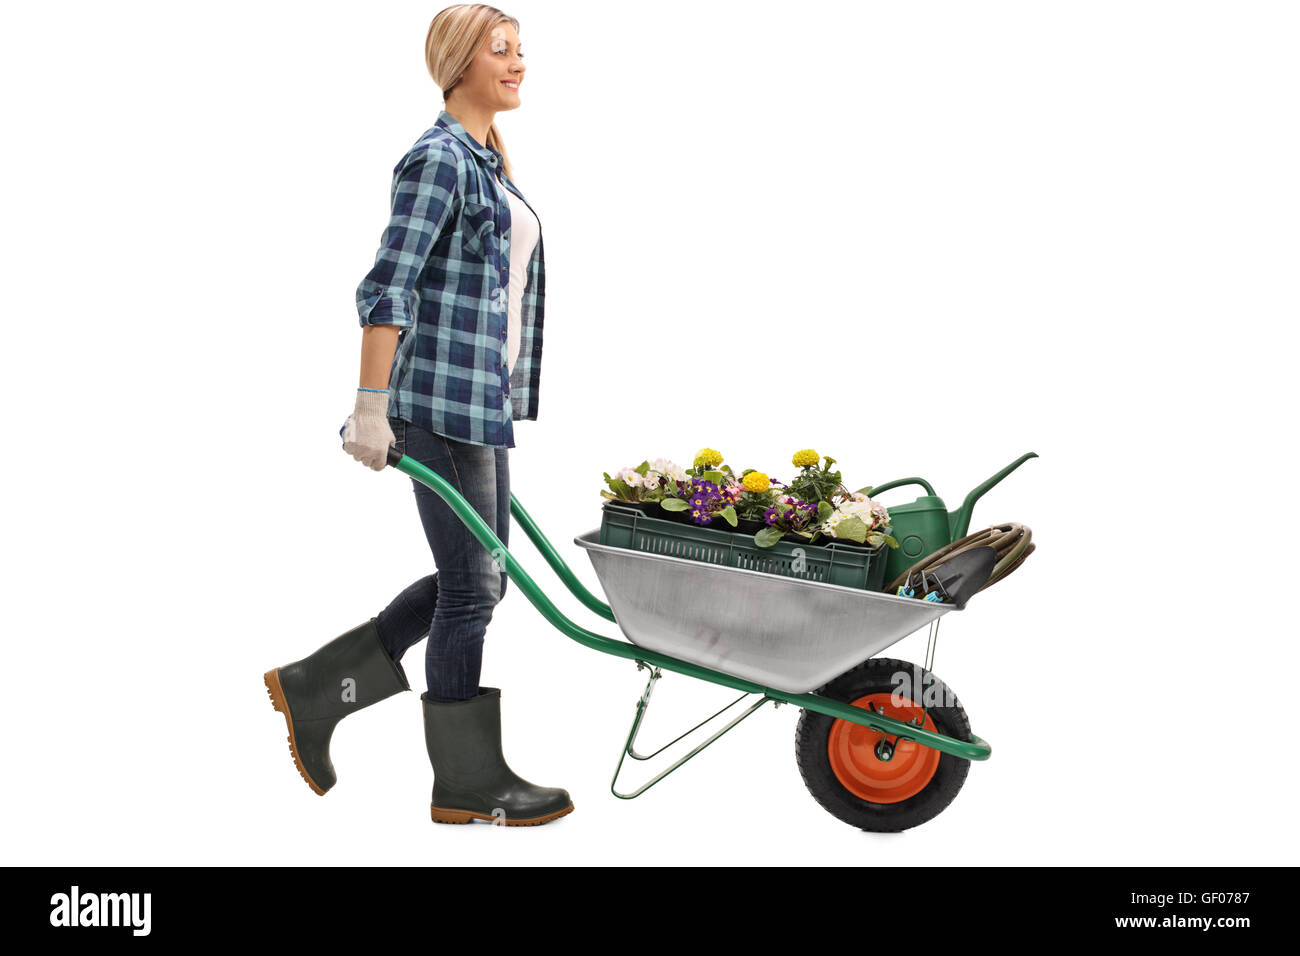 Cheerful blond woman pushing a wheelbarrow with gardening equipment isolated on white background Stock Photo